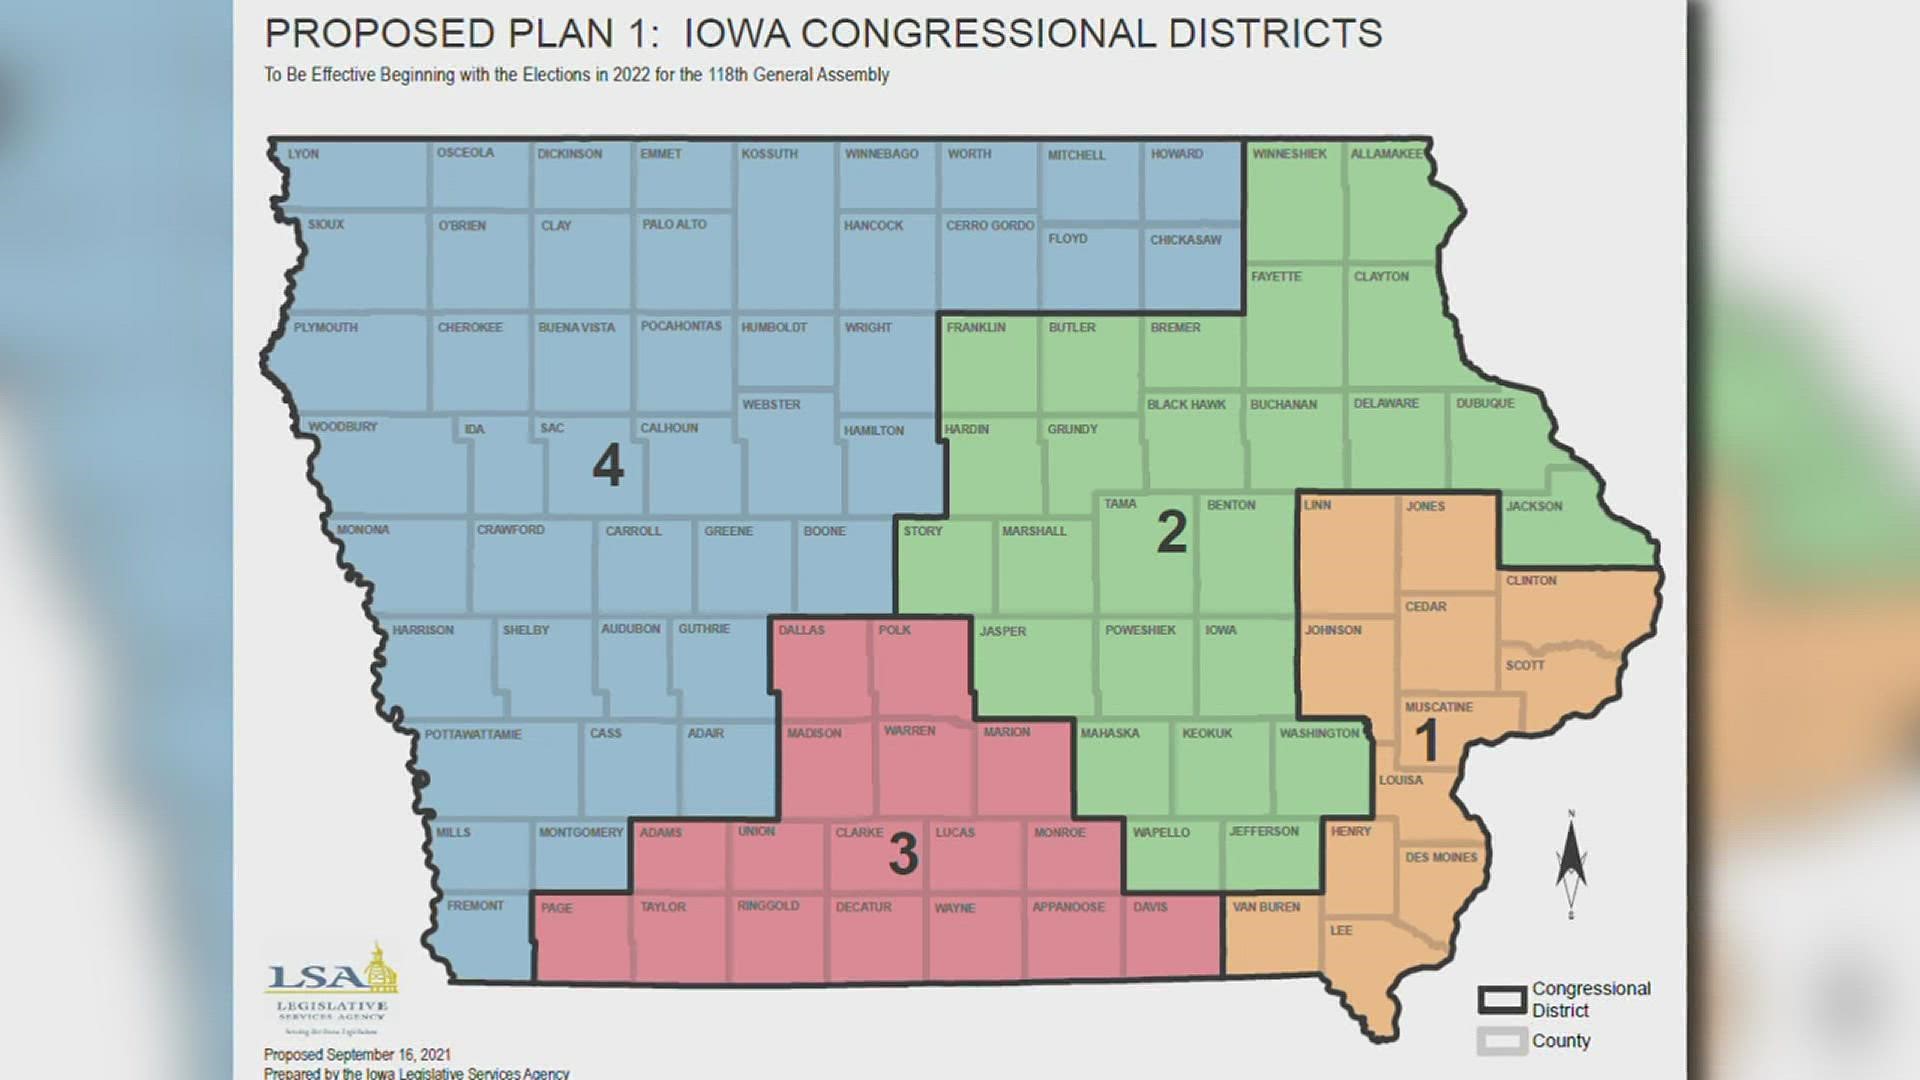 A non-partisan group has proposed new congressional districts that could group the Quad Cities with Cedar Rapids and Iowa City.